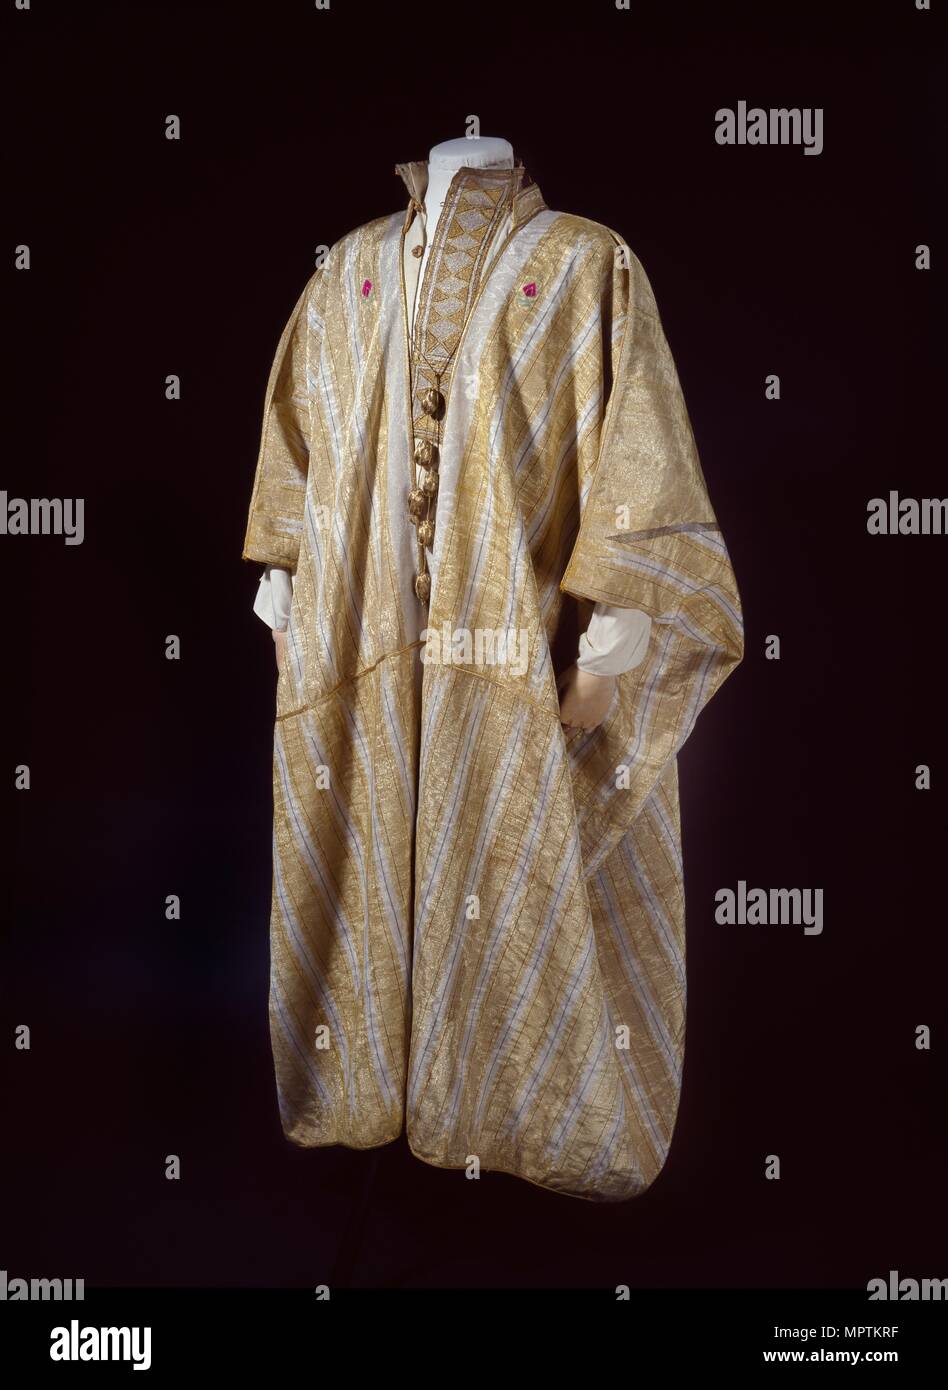 Arab robe worn by TE Lawrence, 1916. Artist: Unknown. Stock Photo